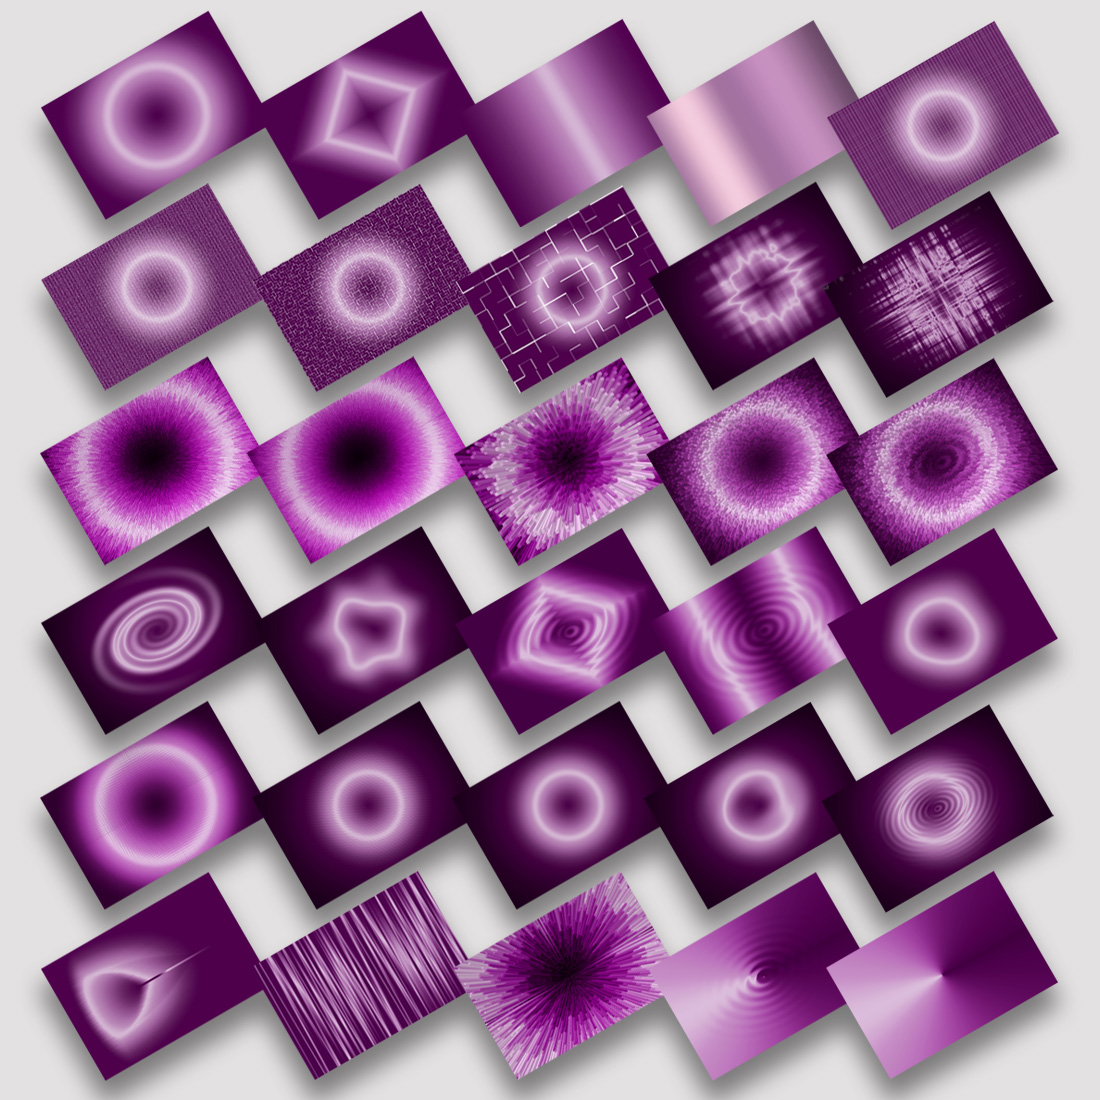 30 Pcs high quality abstract purple colored glowing gradient background designs for designs and illustrations preview image.